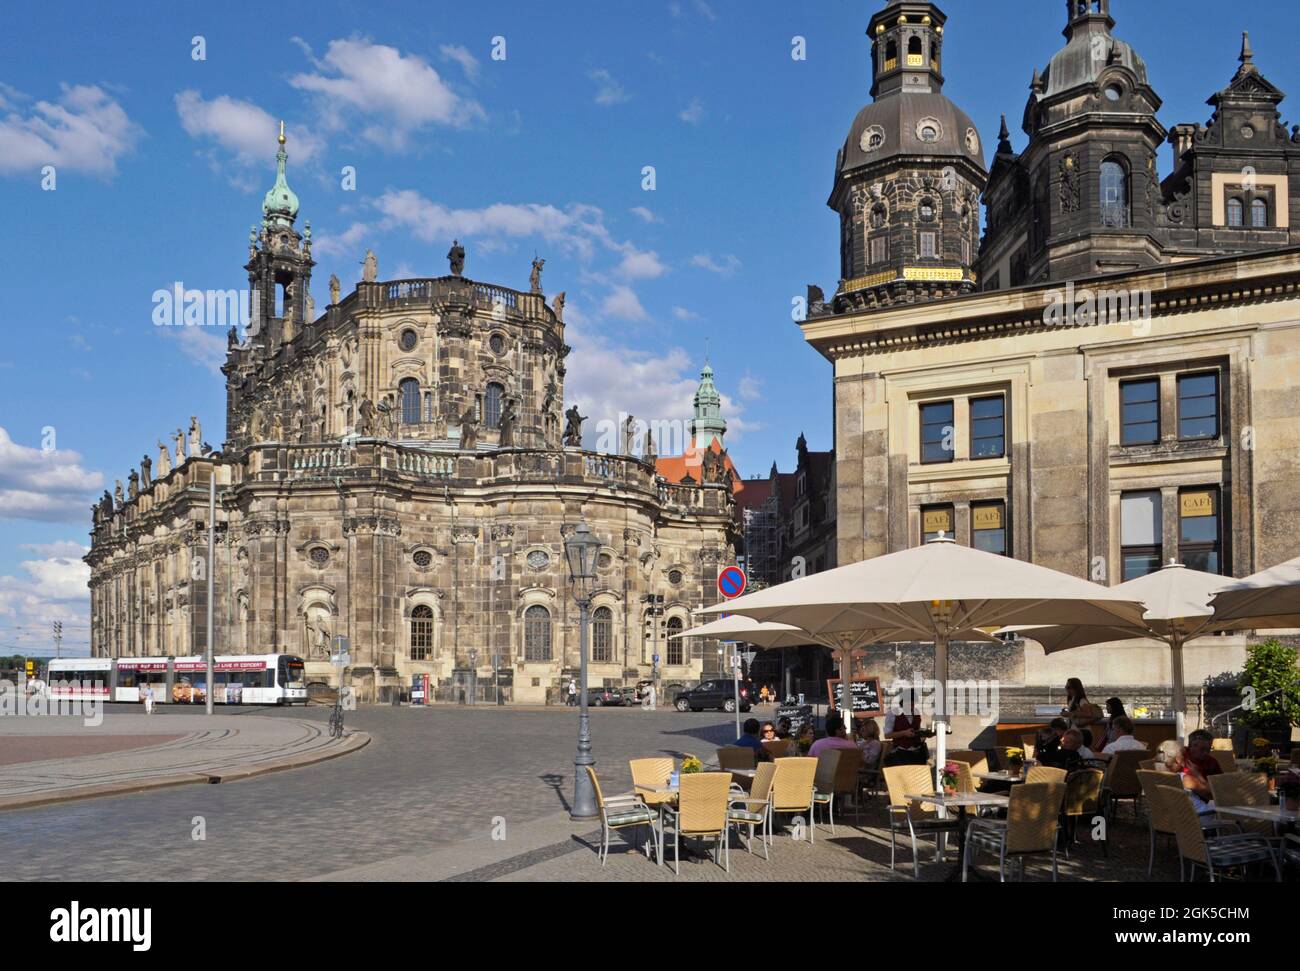 Schinkel cafe in Theaterplatz Square and Hofkirche cathedral or Court Church in the background, Dresden, Germany Stock Photo